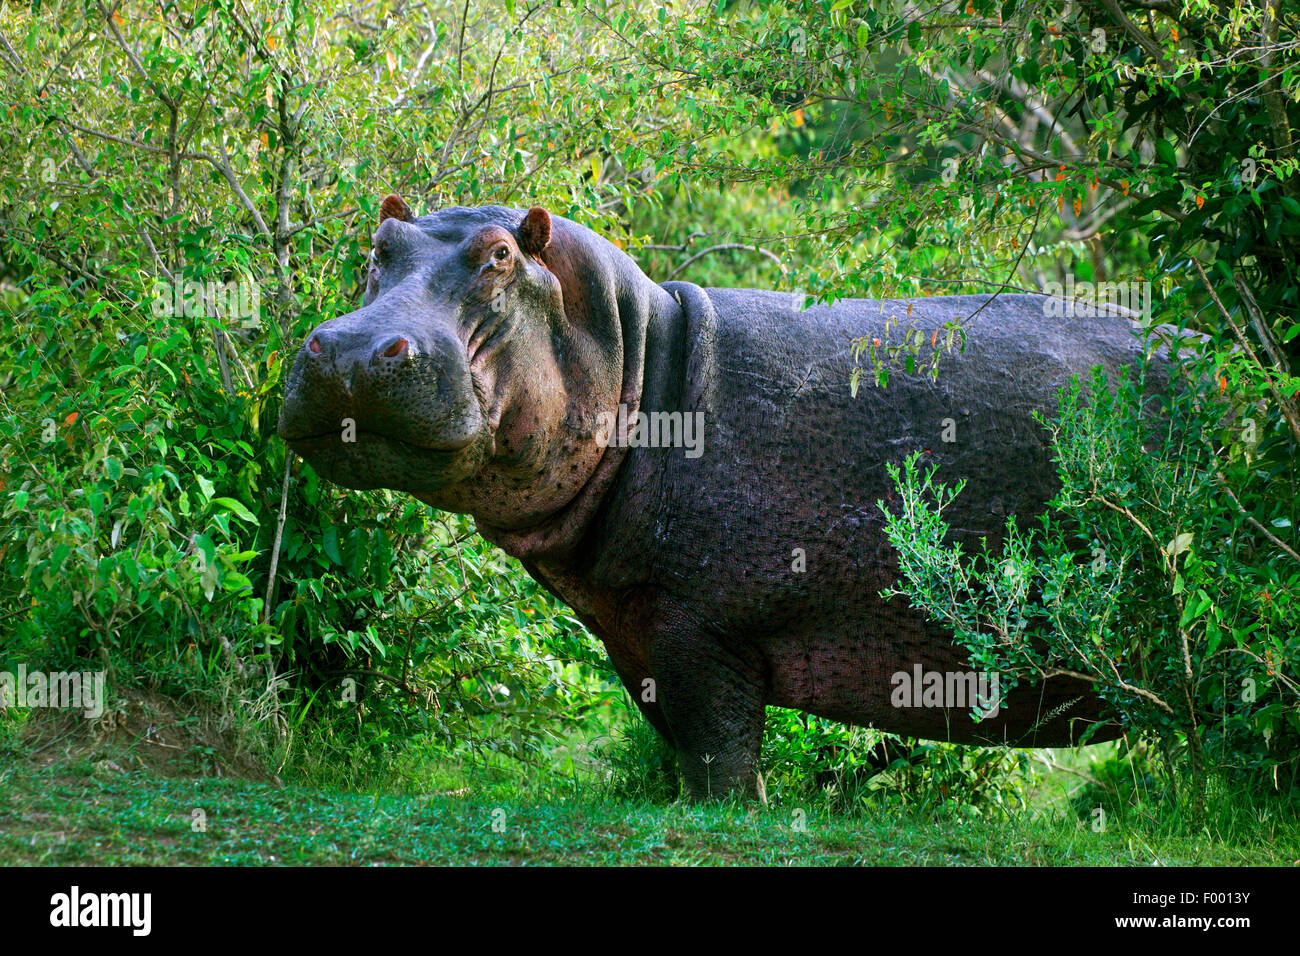 hippopotamus, hippo, Common hippopotamus (Hippopotamus amphibius), in thicket, Africa Stock Photo